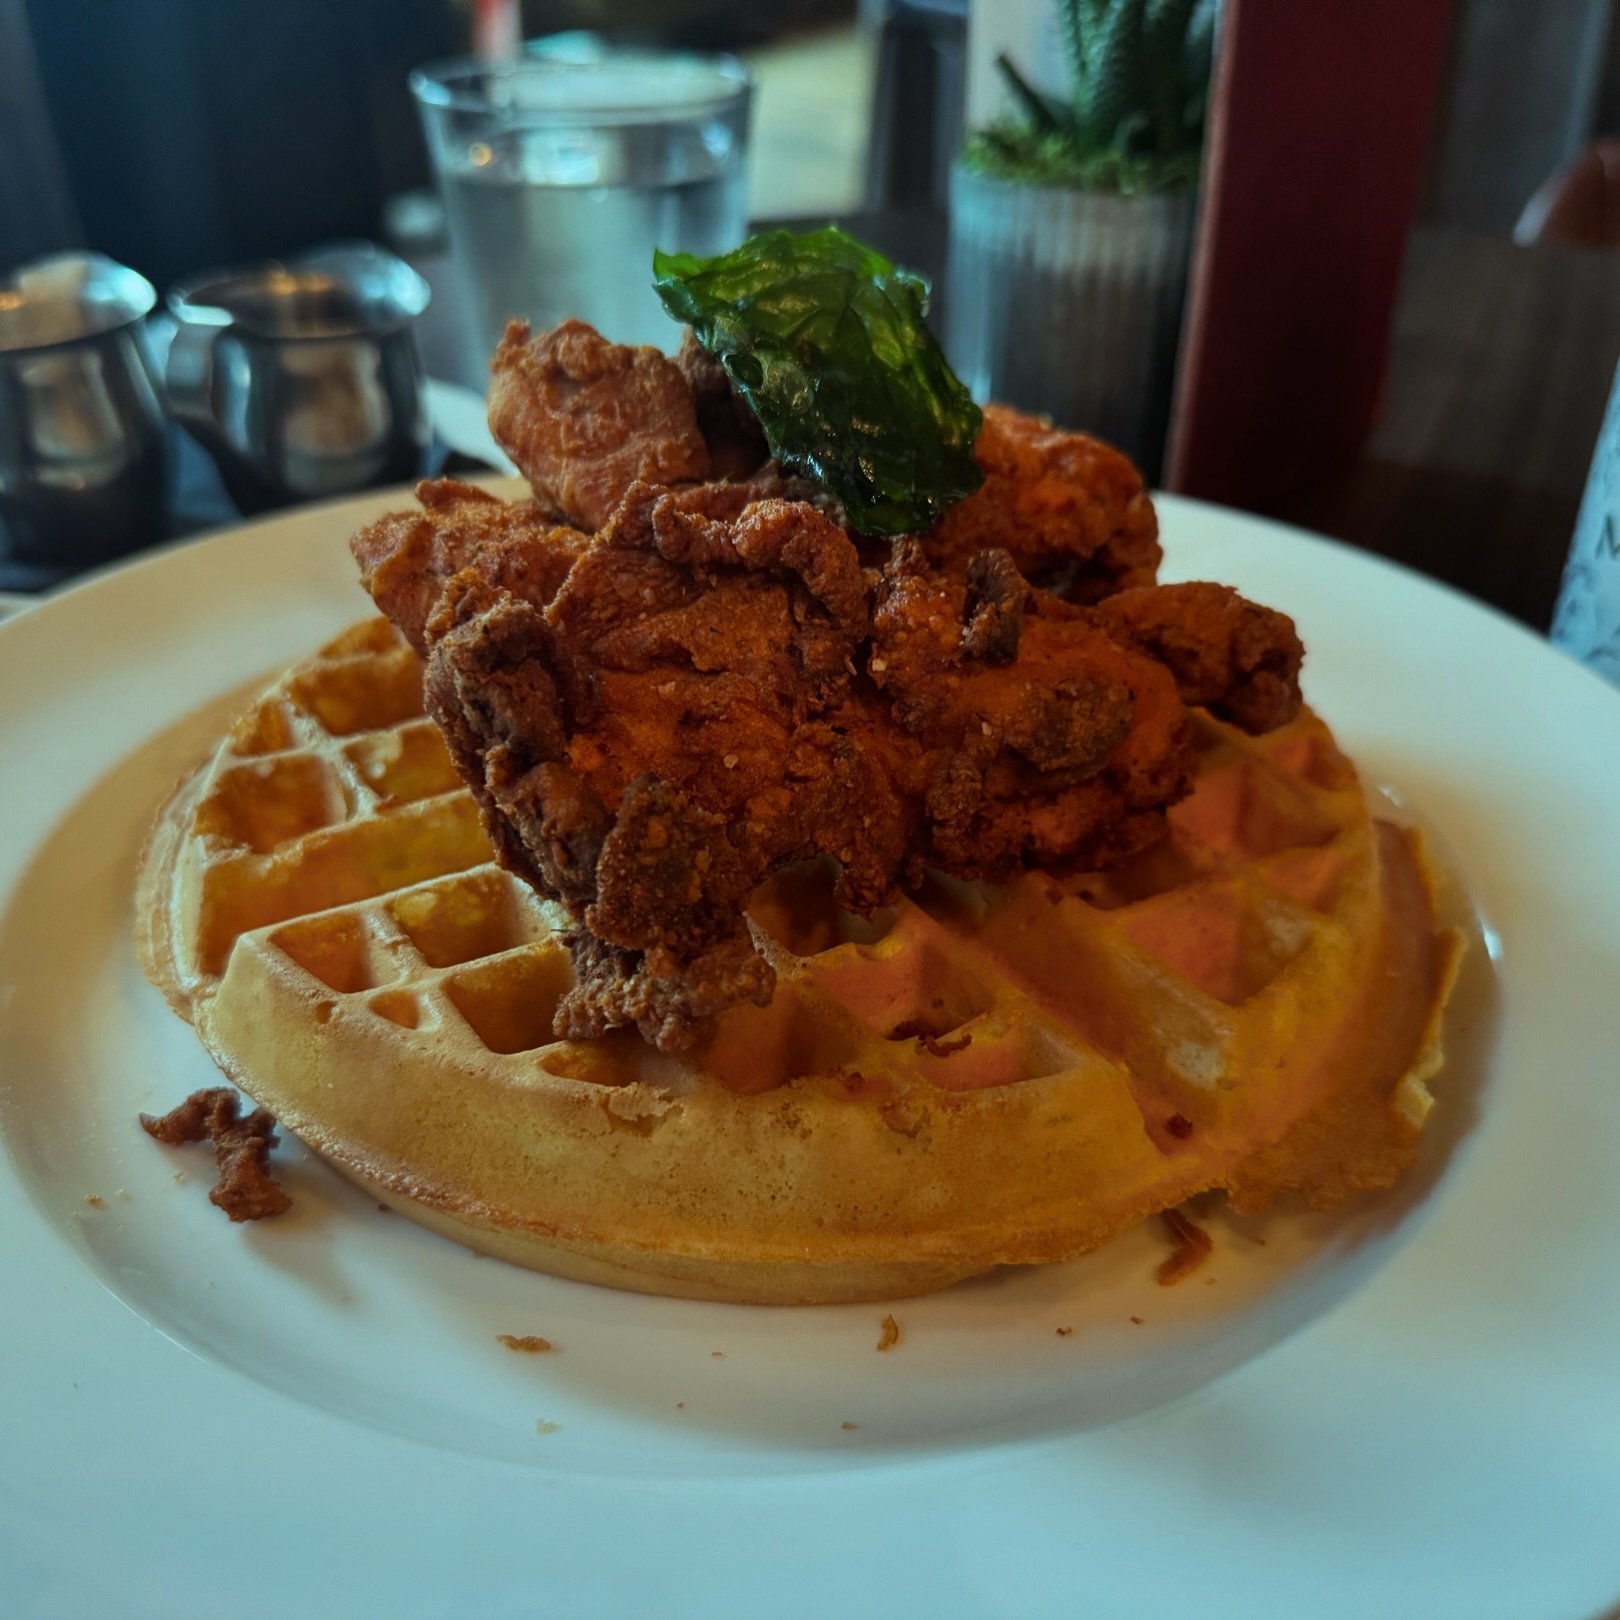 Lunch is at 2 so I figured I needed to pre-game some chicken and waffles.